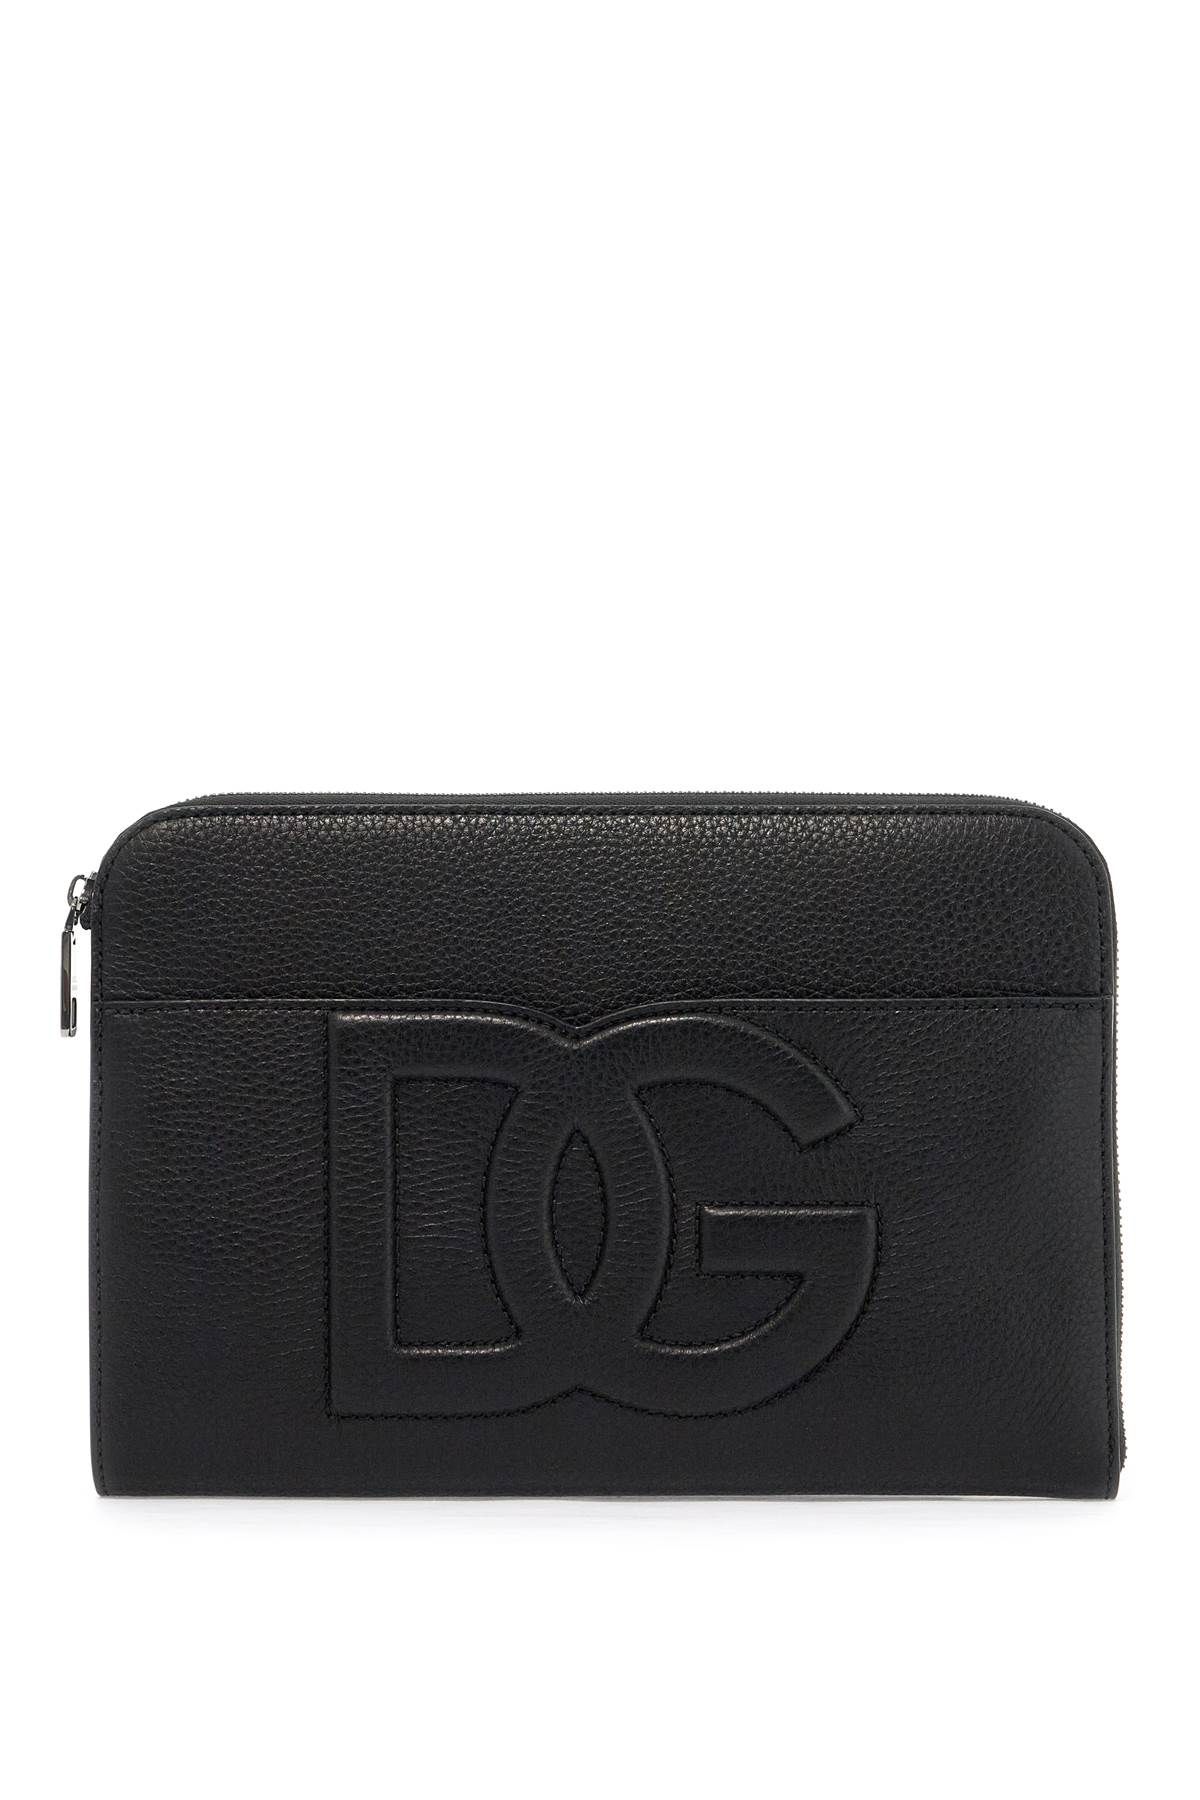 Dolce & Gabbana "embossed Leather Media Pouch In Black